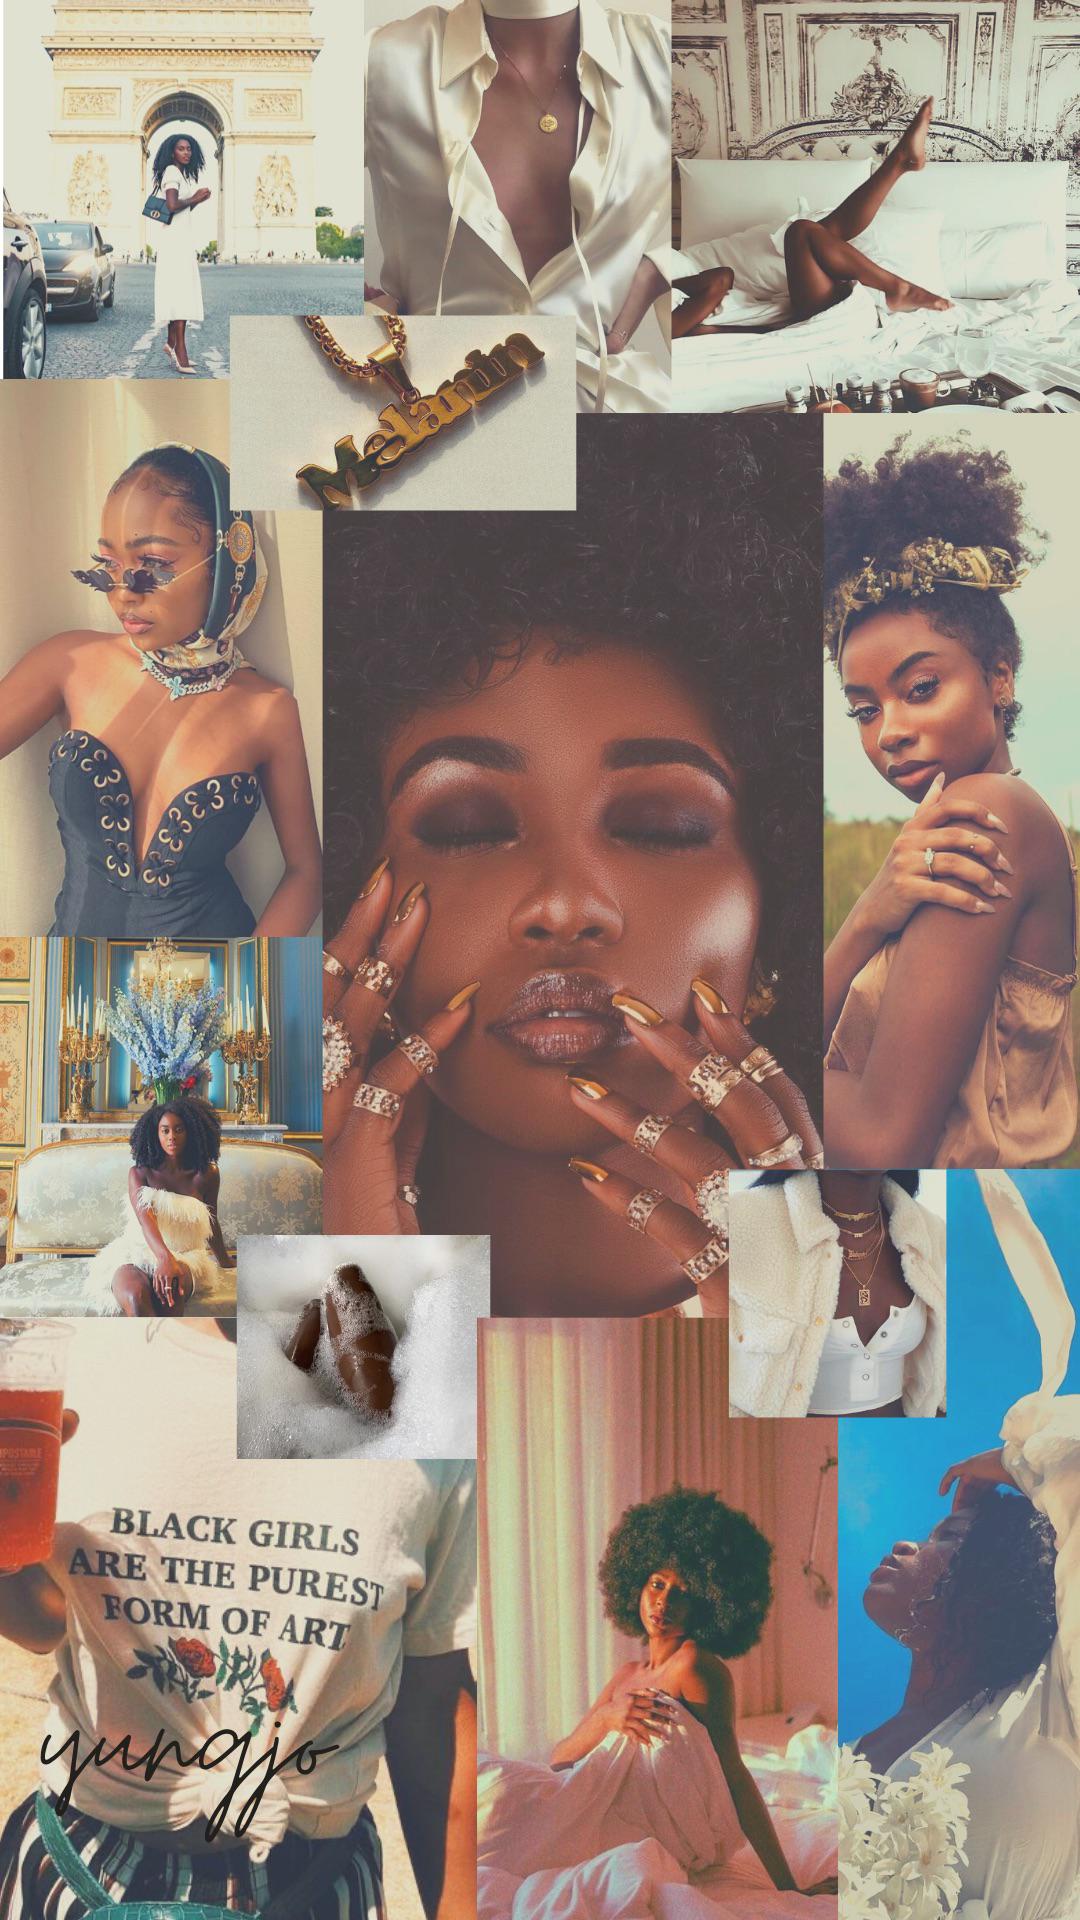 Made this collage wallpaper. Black girl magic ✨